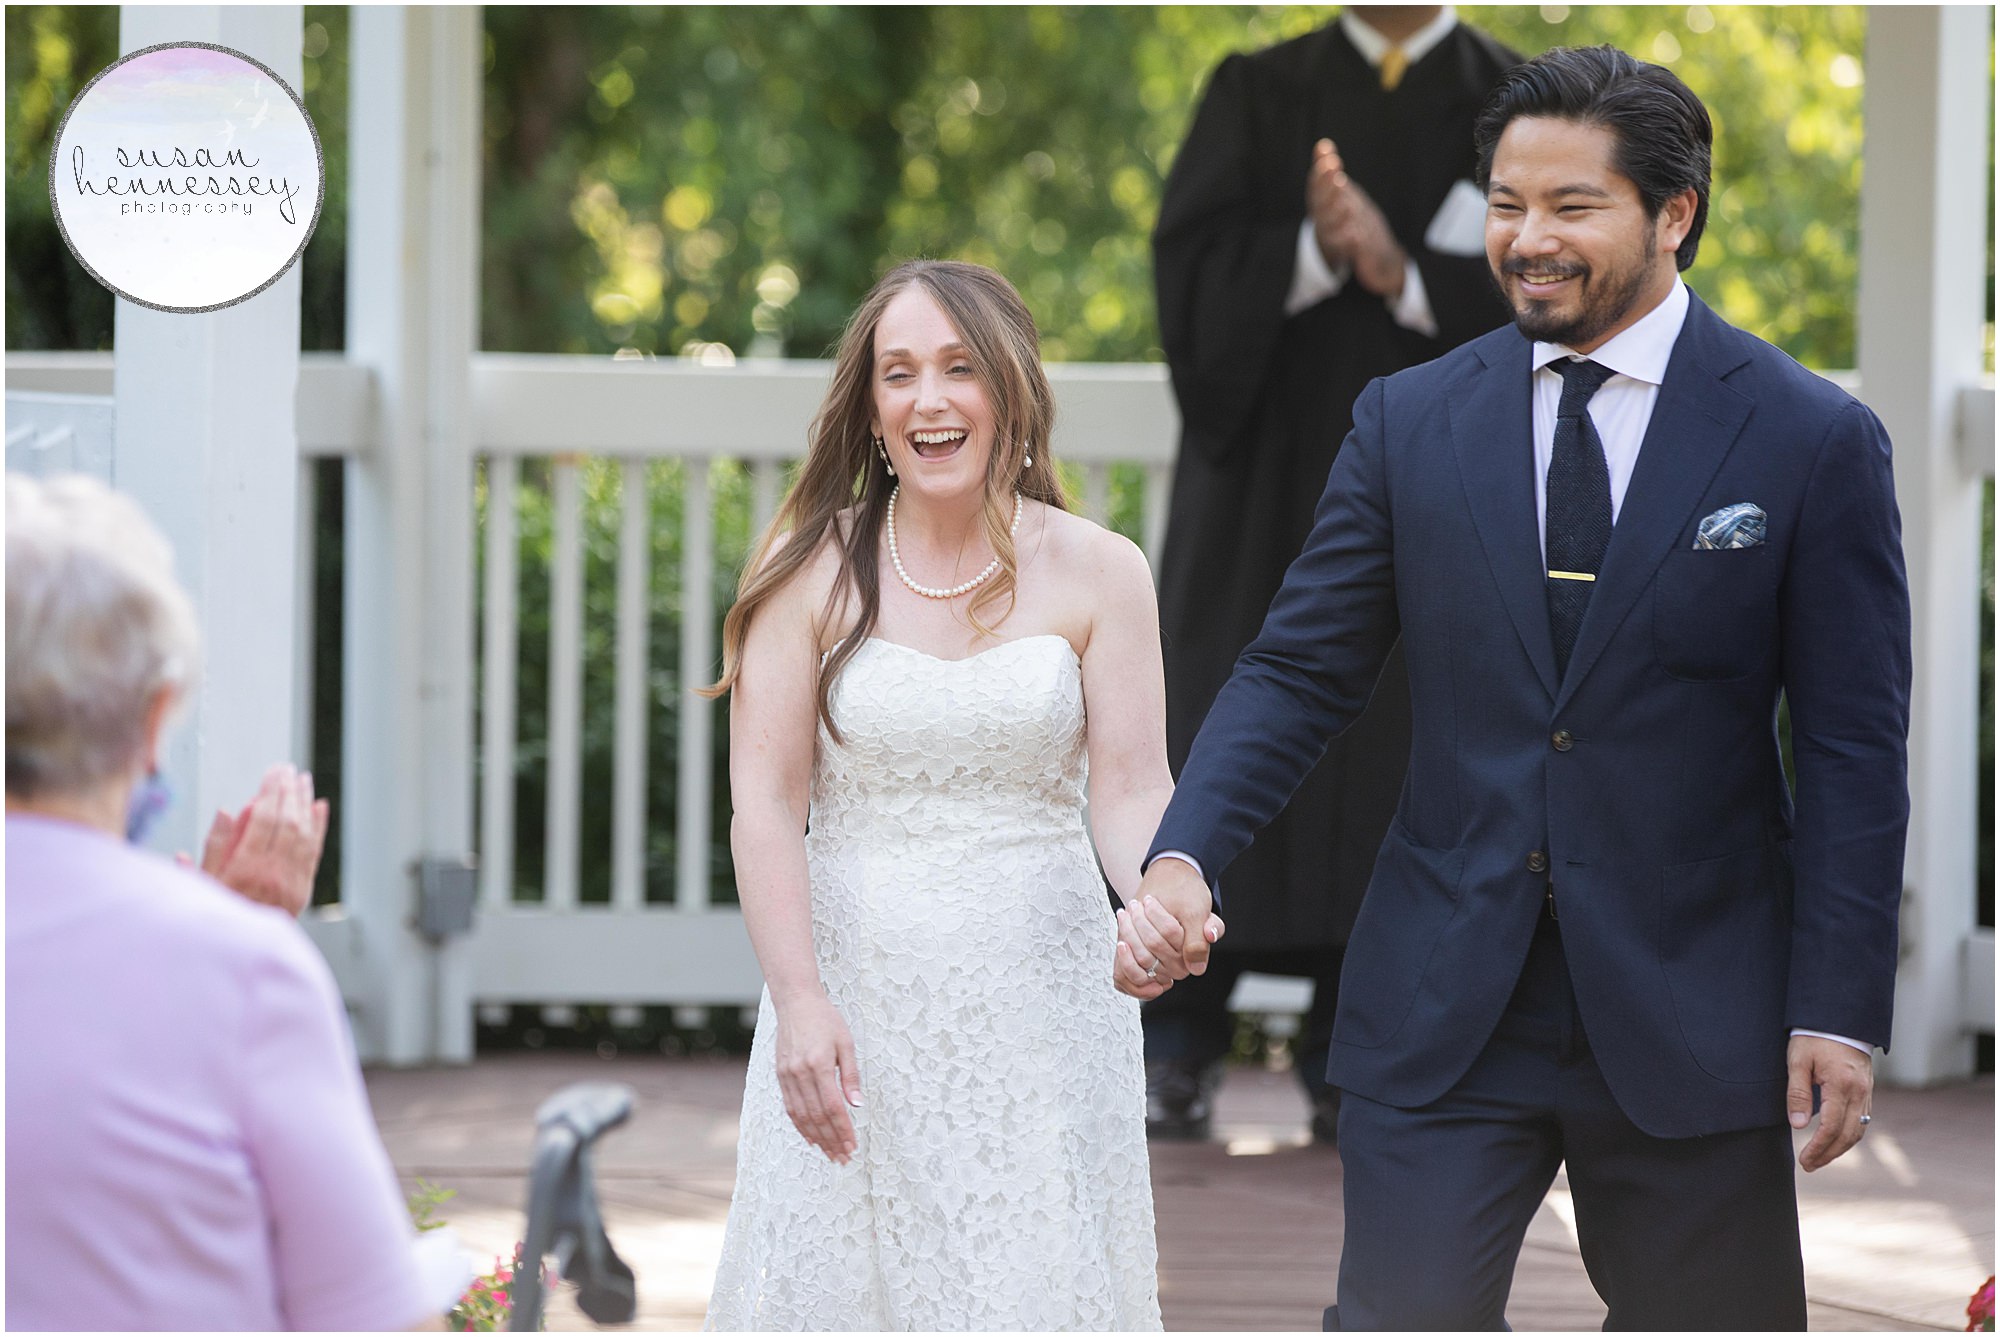 A couple has an intimate wedding ceremony at Sayen Gardens